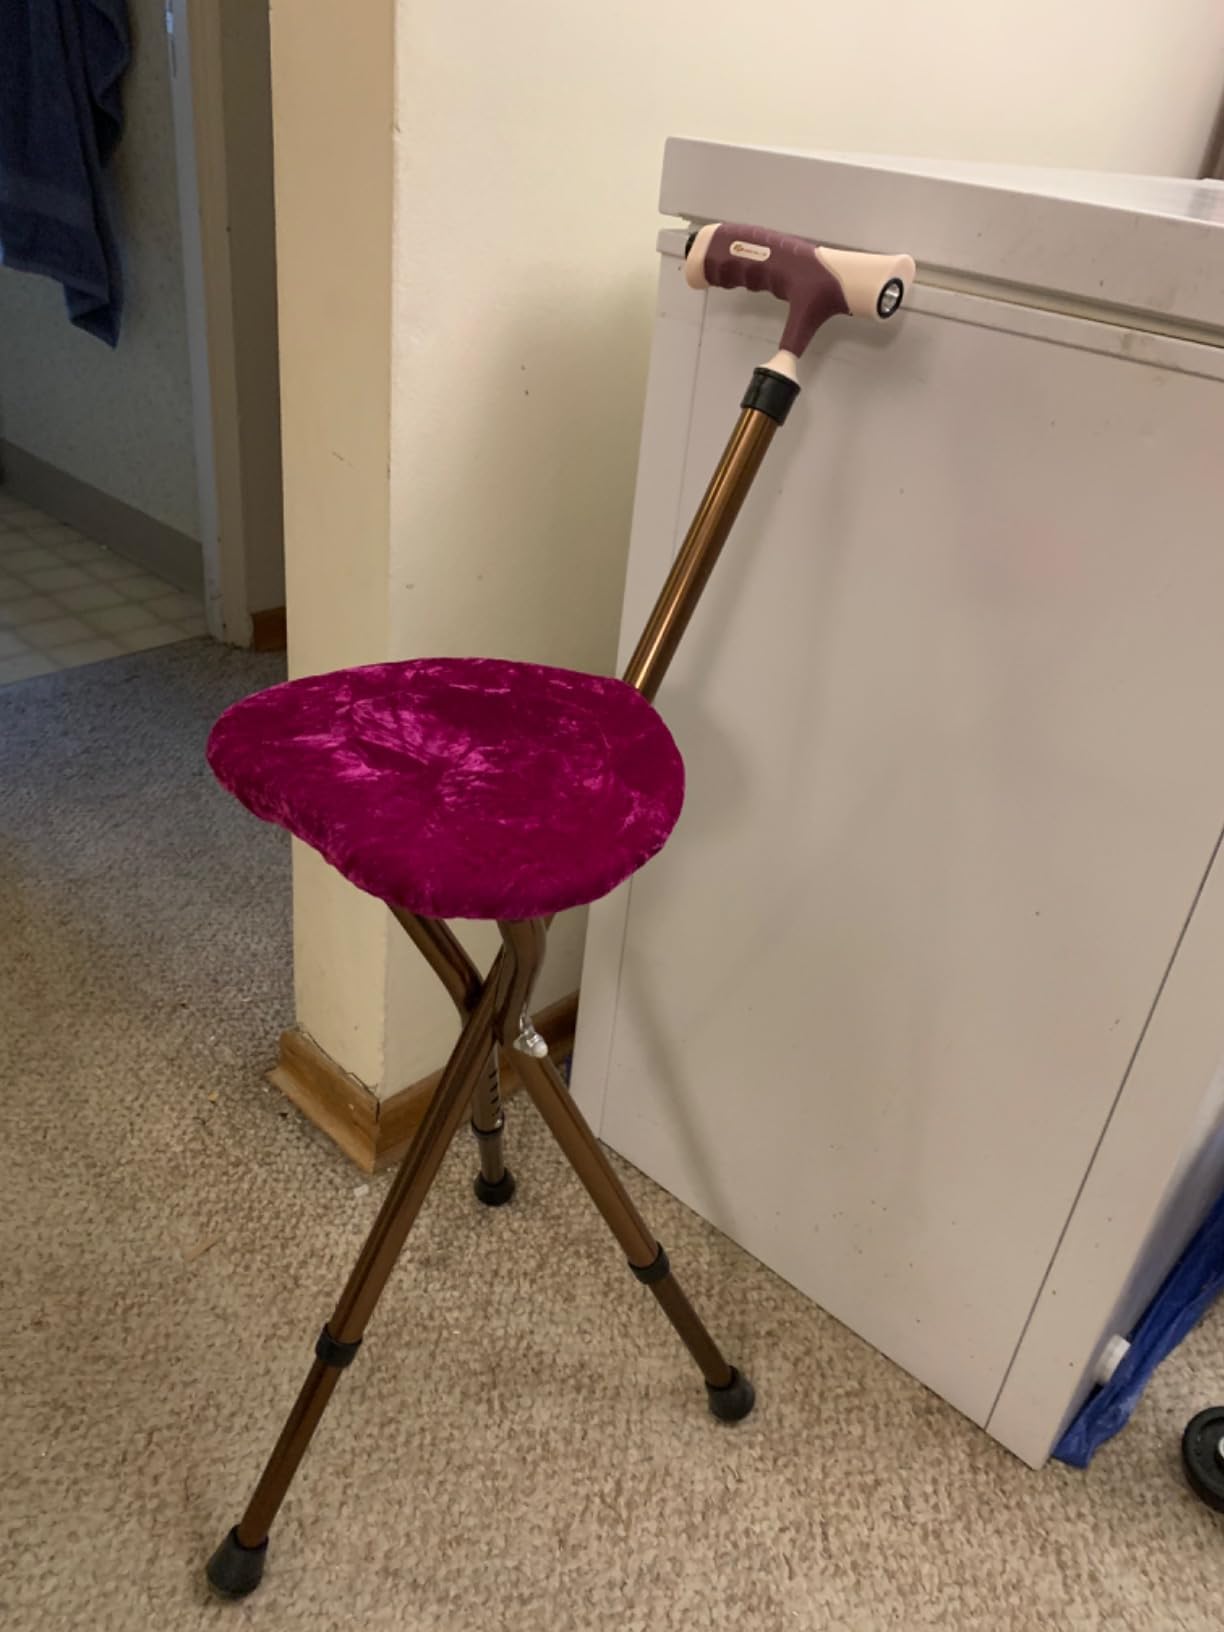 Lightweight Adjustable Folding Cane Seat with Light - Costway